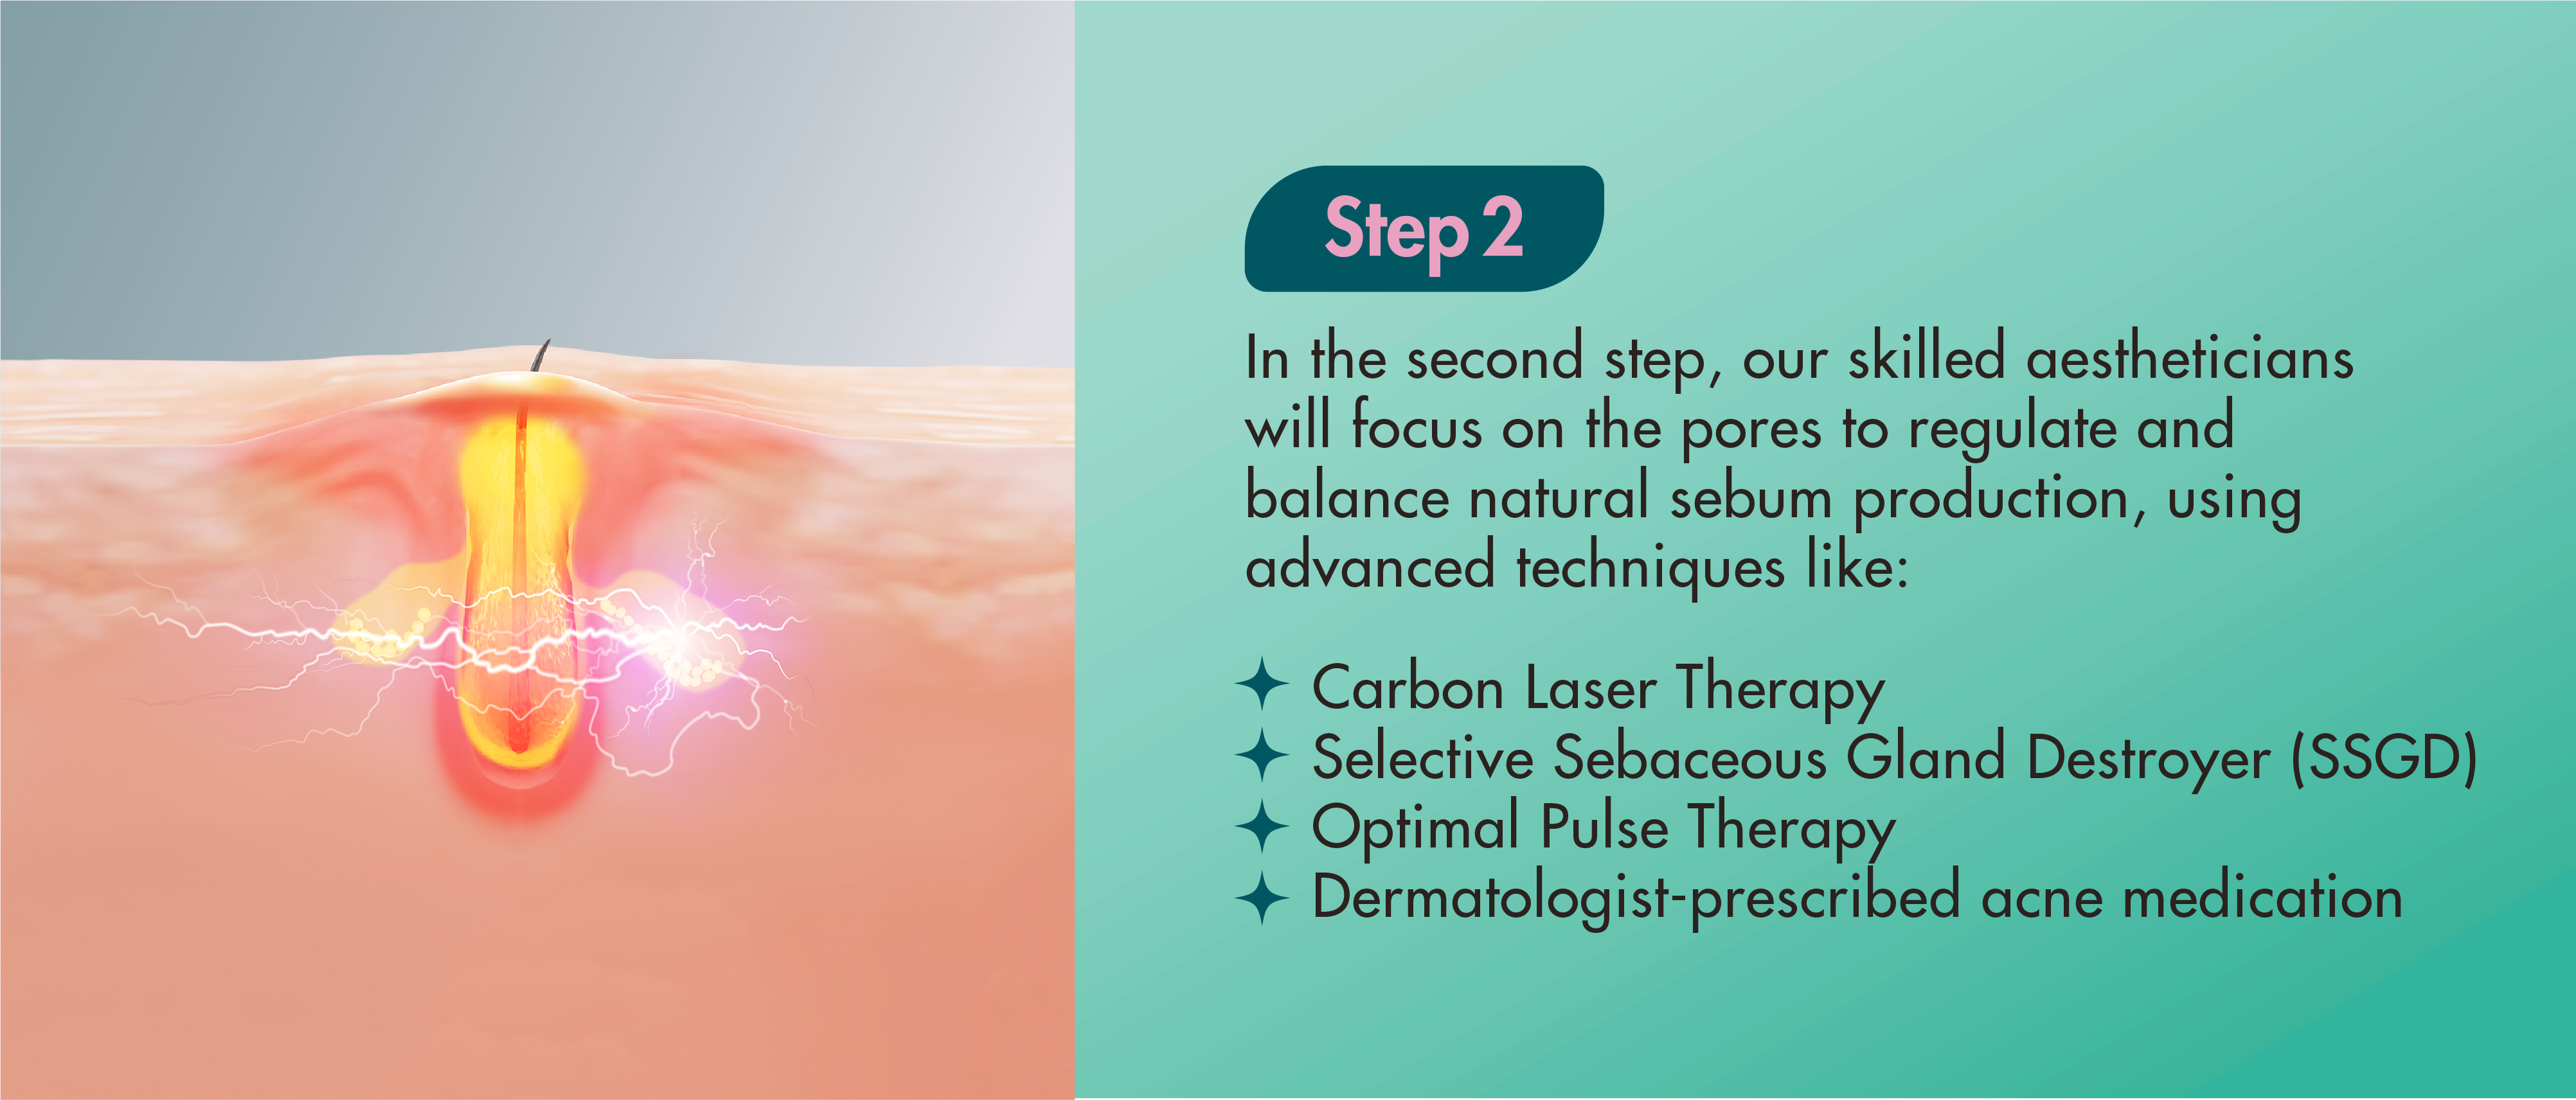 In the second step, our skilled aestheticians will focus on the pores to regulate and balance natural sebum production, using advanced techniques like: Carbon Laser Therapy Selective Sebaceous Gland Destroyer (SSGD) Optimal Pulse Therapy 4 Dermatologist-prescribed acne medication